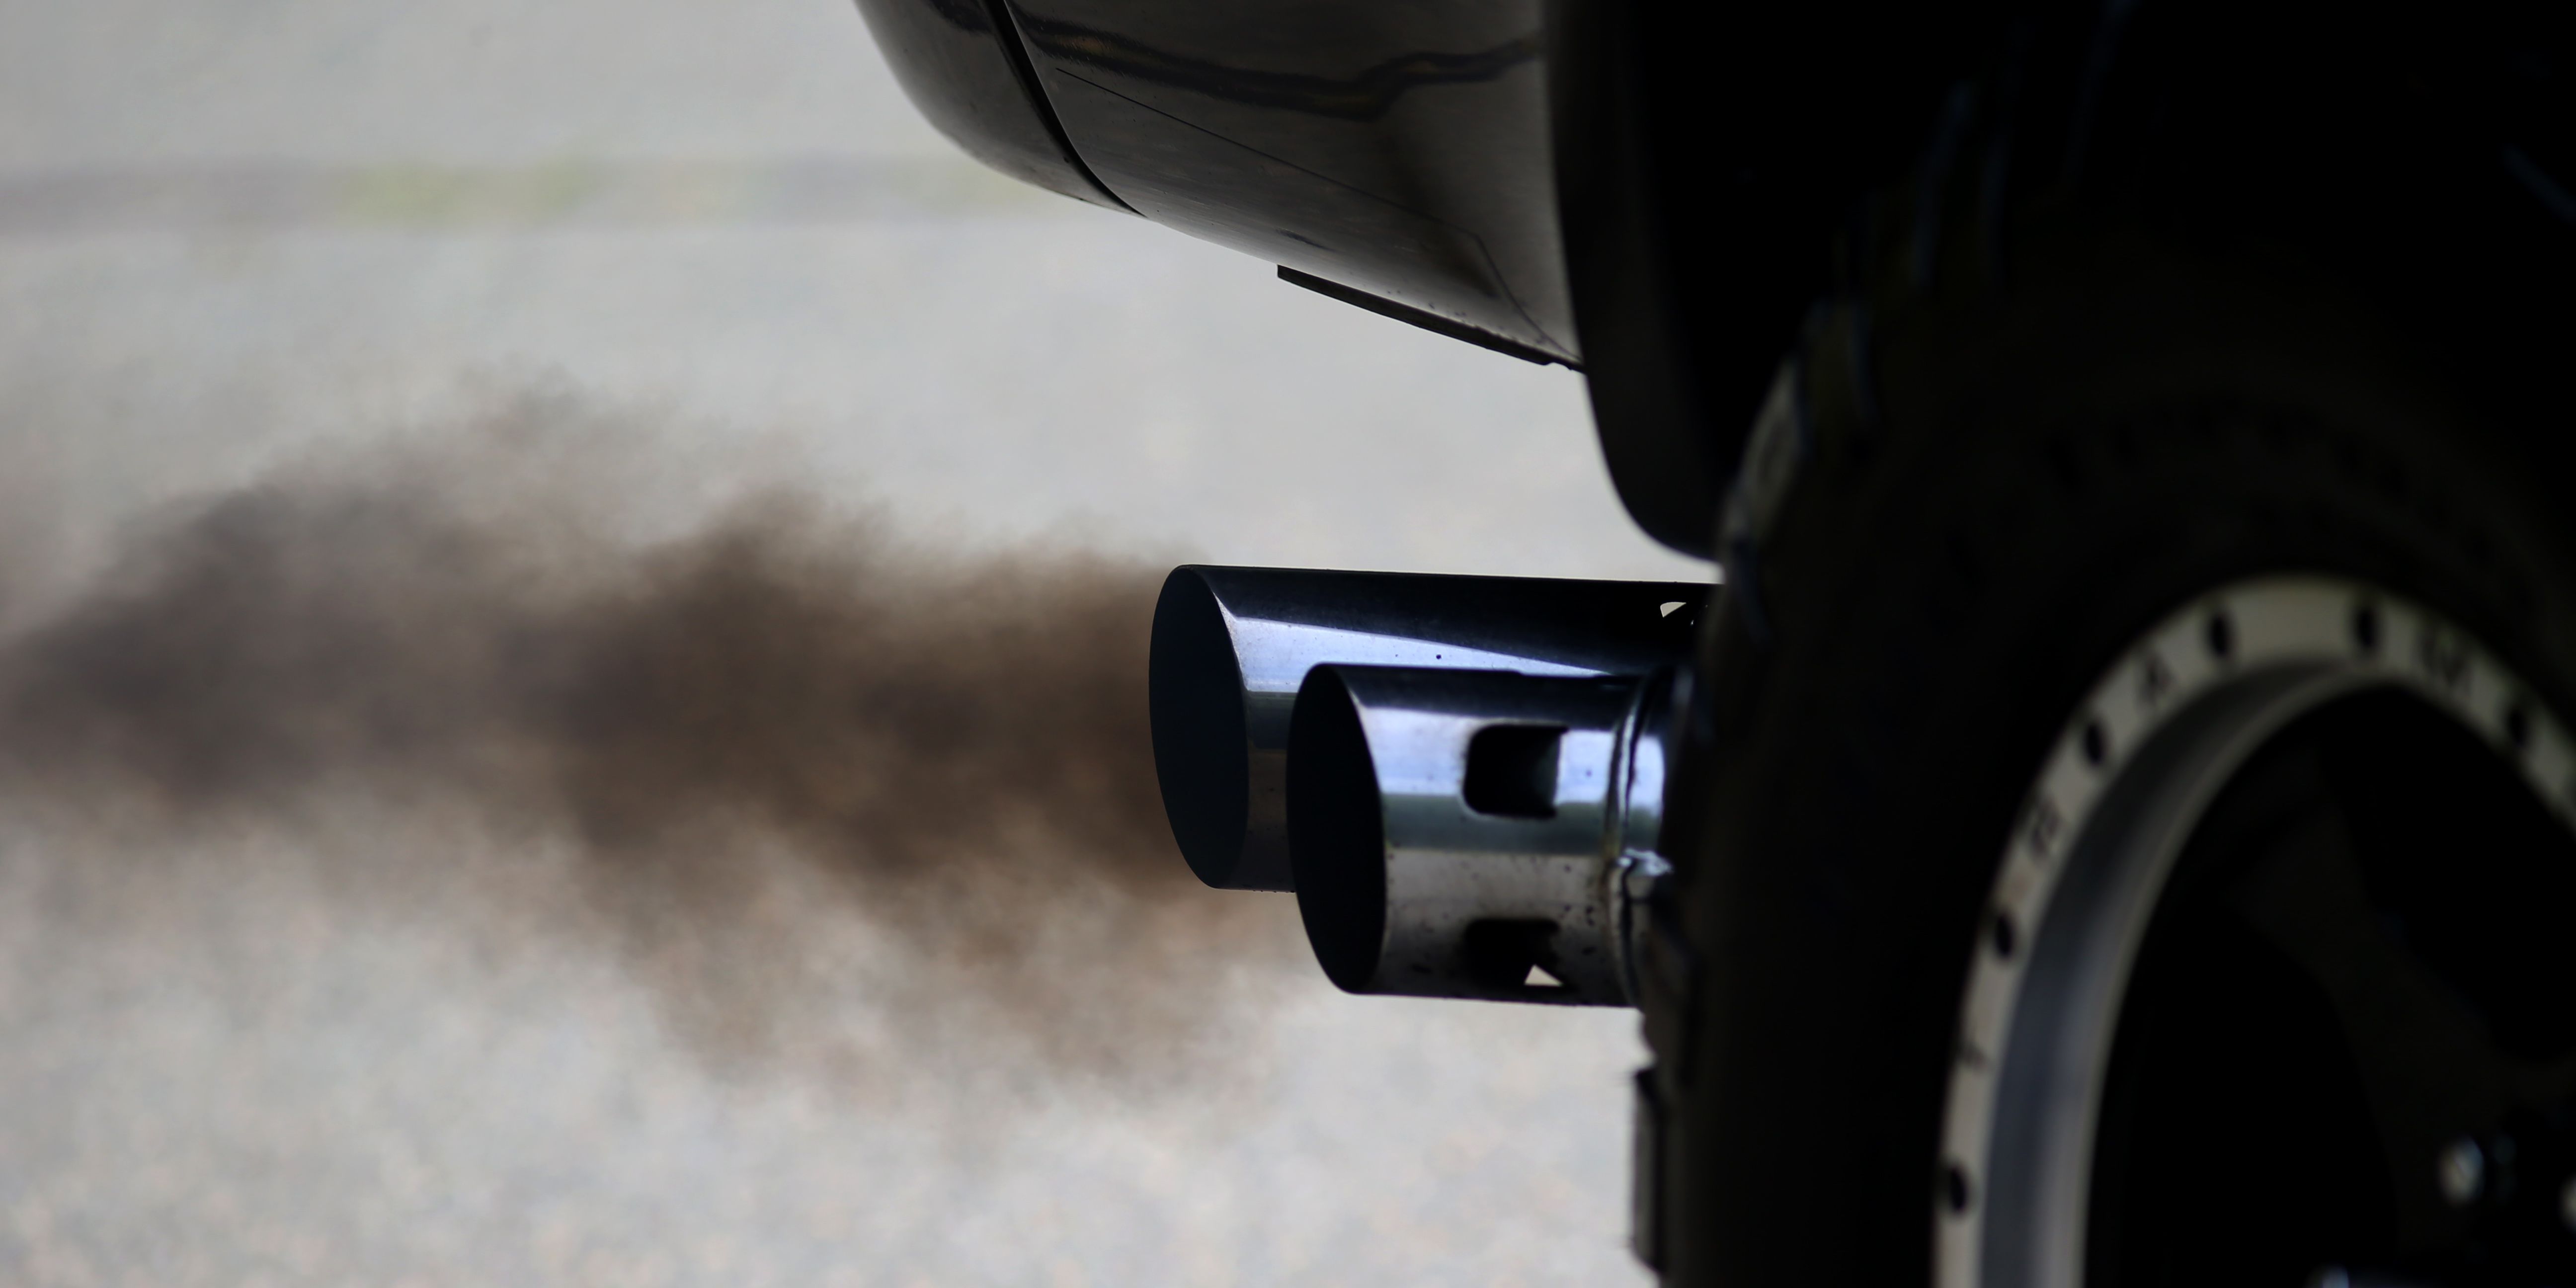 EPA Hits Two More Diesel Tuners With $10 Million Fine For Defeat Devices